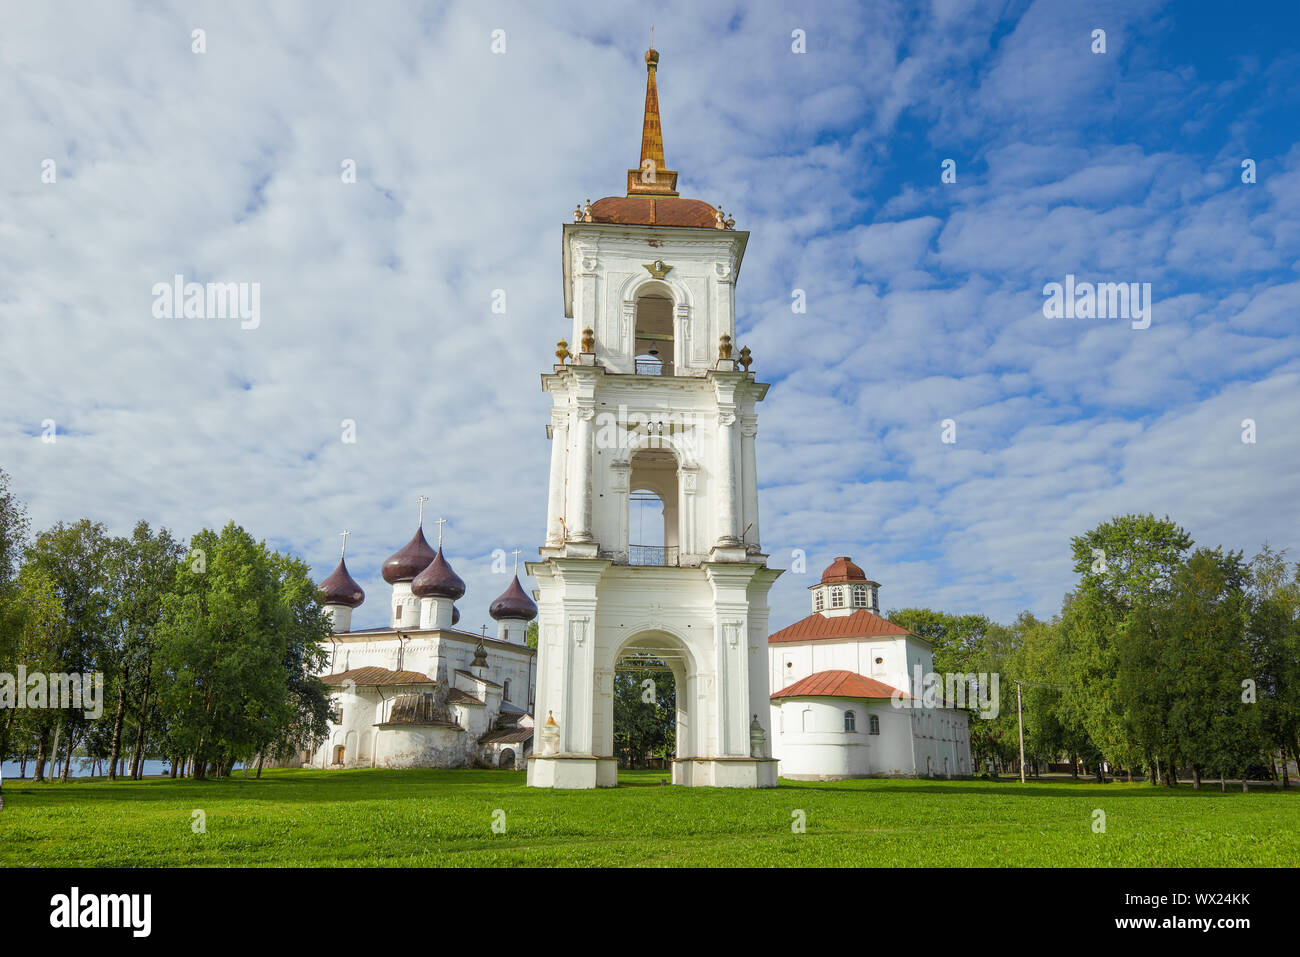 Old bell tower on the background of two Orthodox churches. Cathedral Square in the city of Kargopol. Arkhangelsk region, Russia Stock Photo